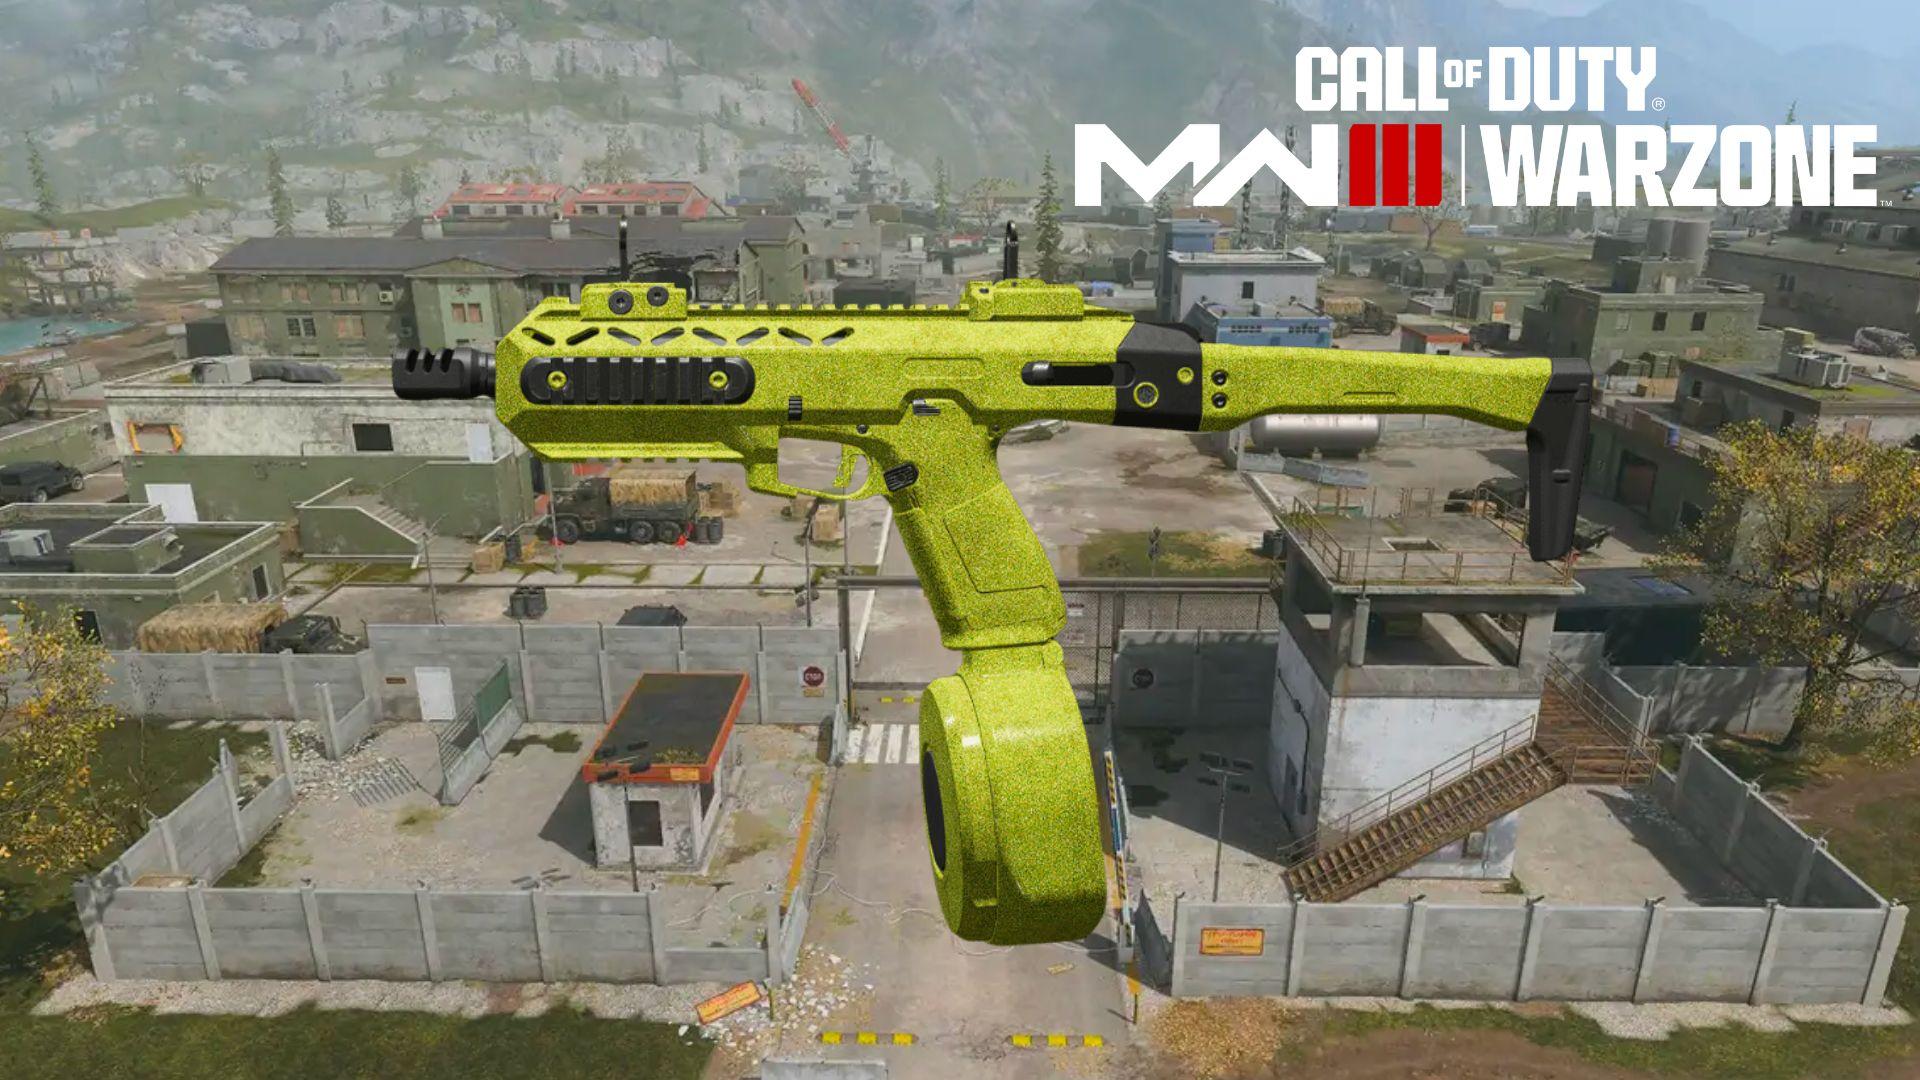 Green COR-45 pistol with barrel attachment on Warzone map